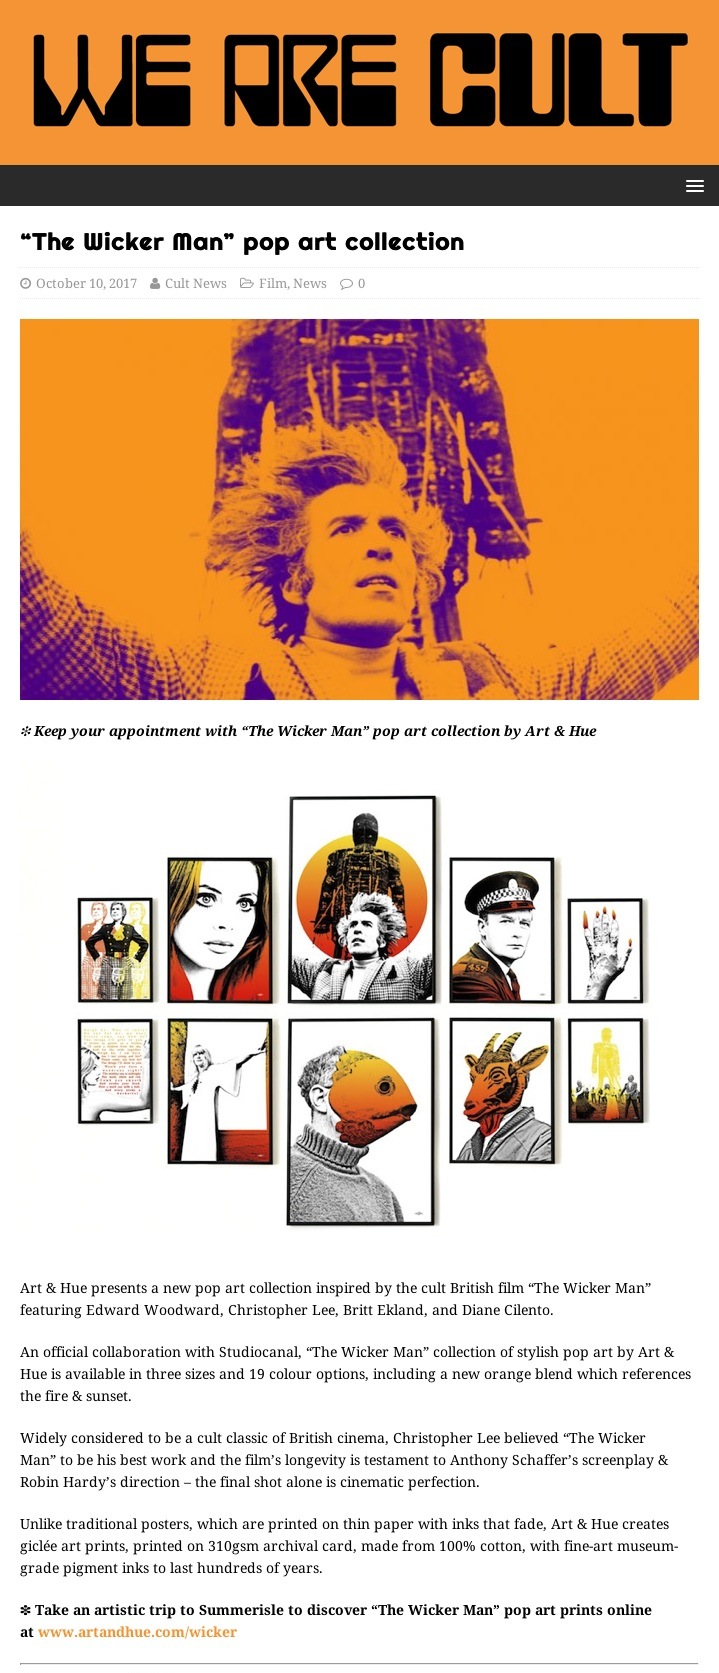 The Wicker Man pop art collection – We Are Cult